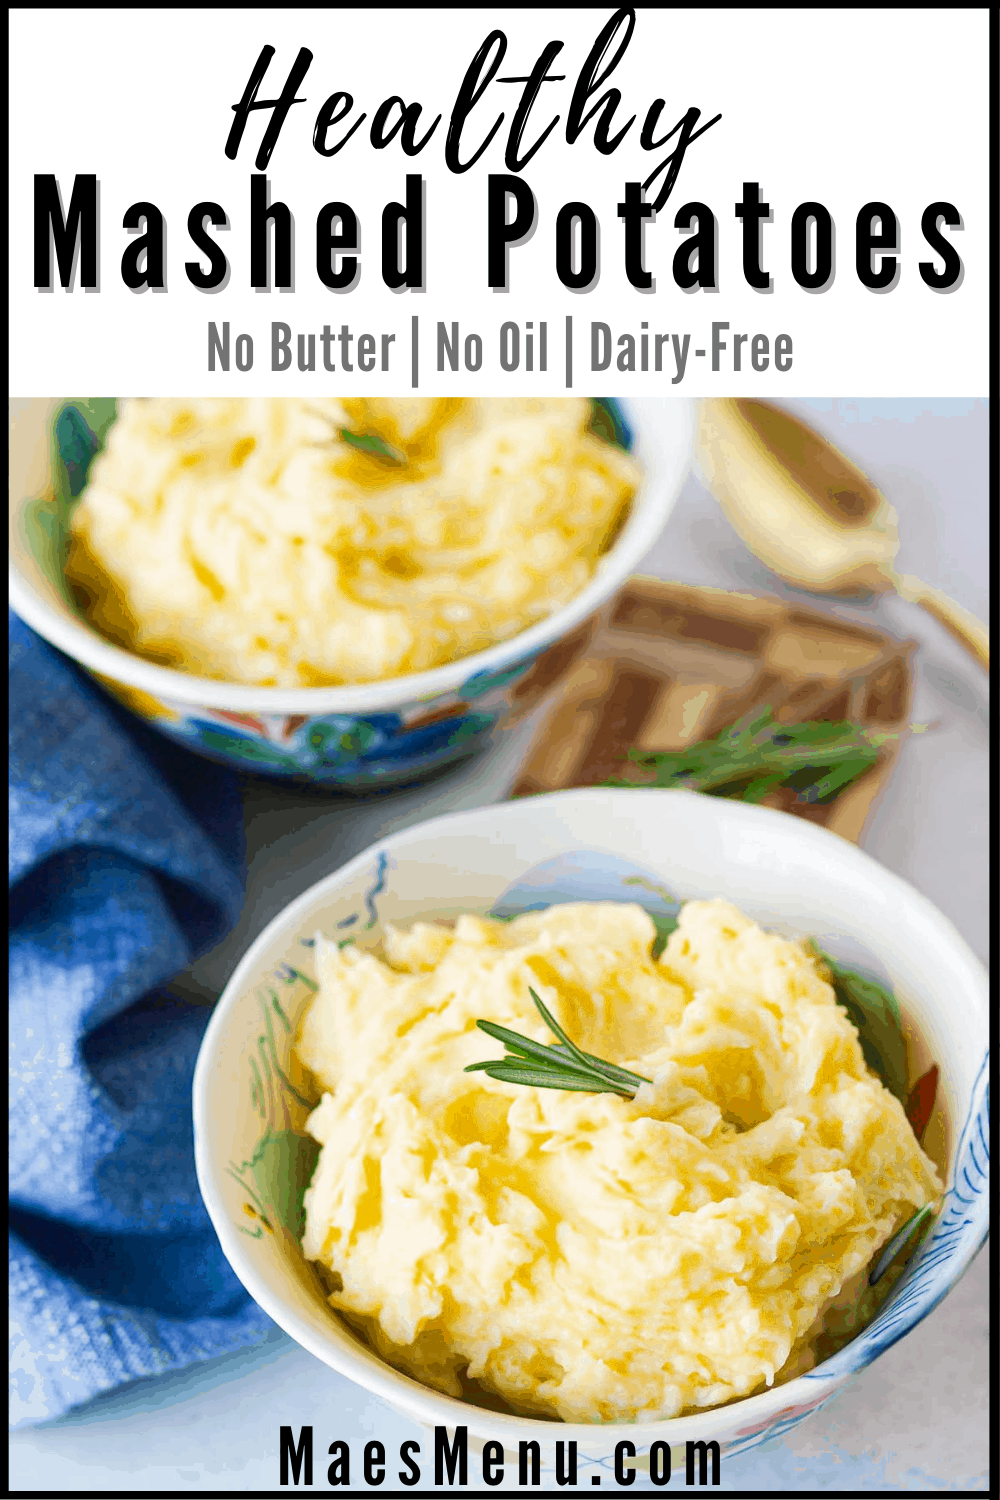 A pinterest pin for healthy mashed potatoes without butter or oi. On the image is a side angle shot of the two bowls, a cutting board, rosemary, and a spoon